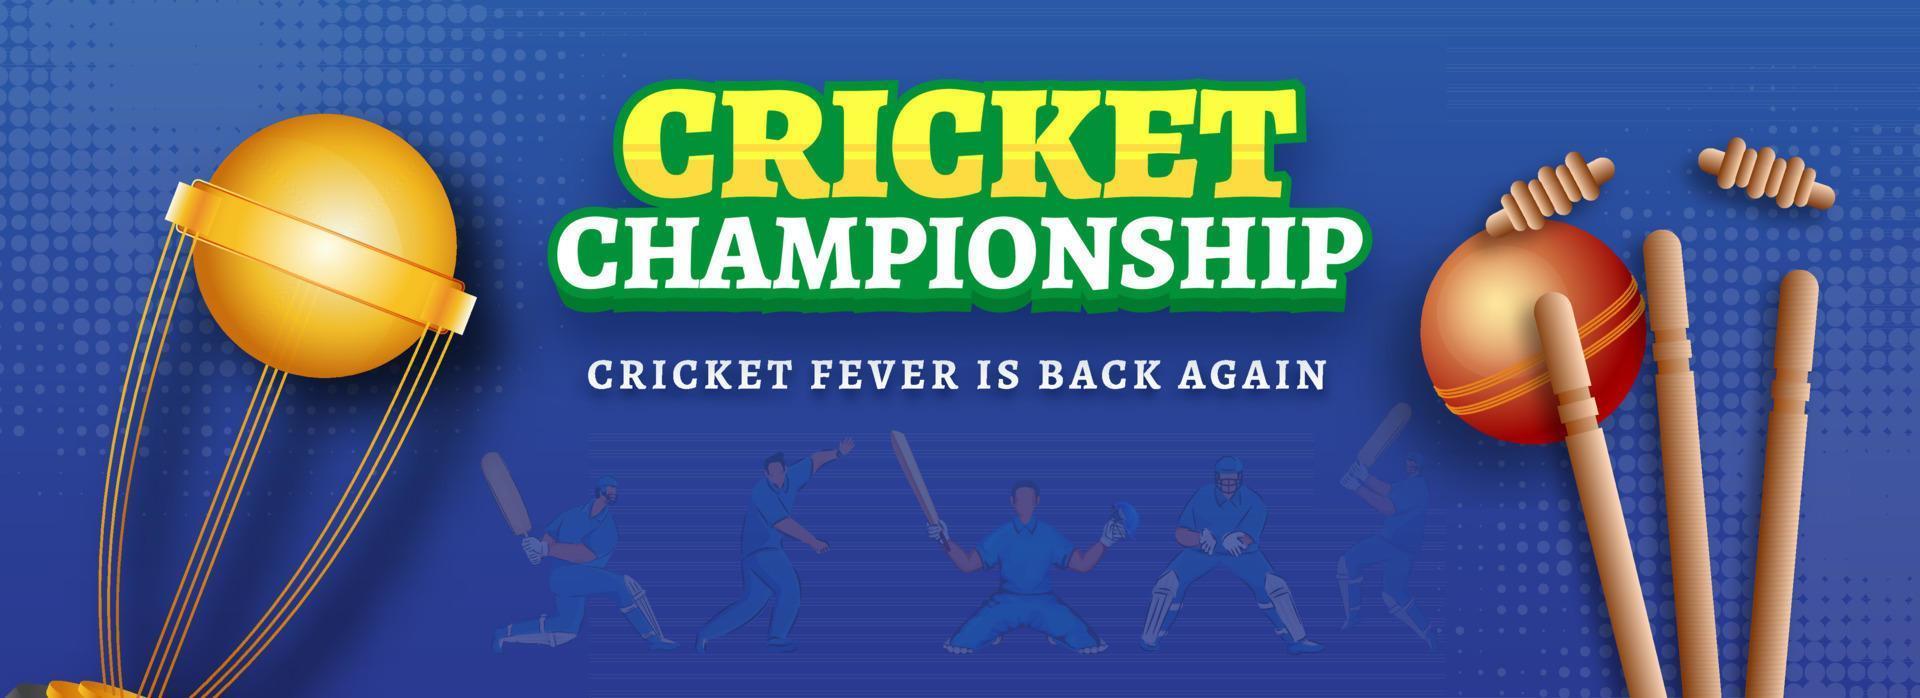 Cricket Championship Text in Sticker Style with Golden Trophy Cup, Ball Hitting Wicket Stumps and Cricketers on Blue Halftone Effect Background. Header or Banner Design. vector